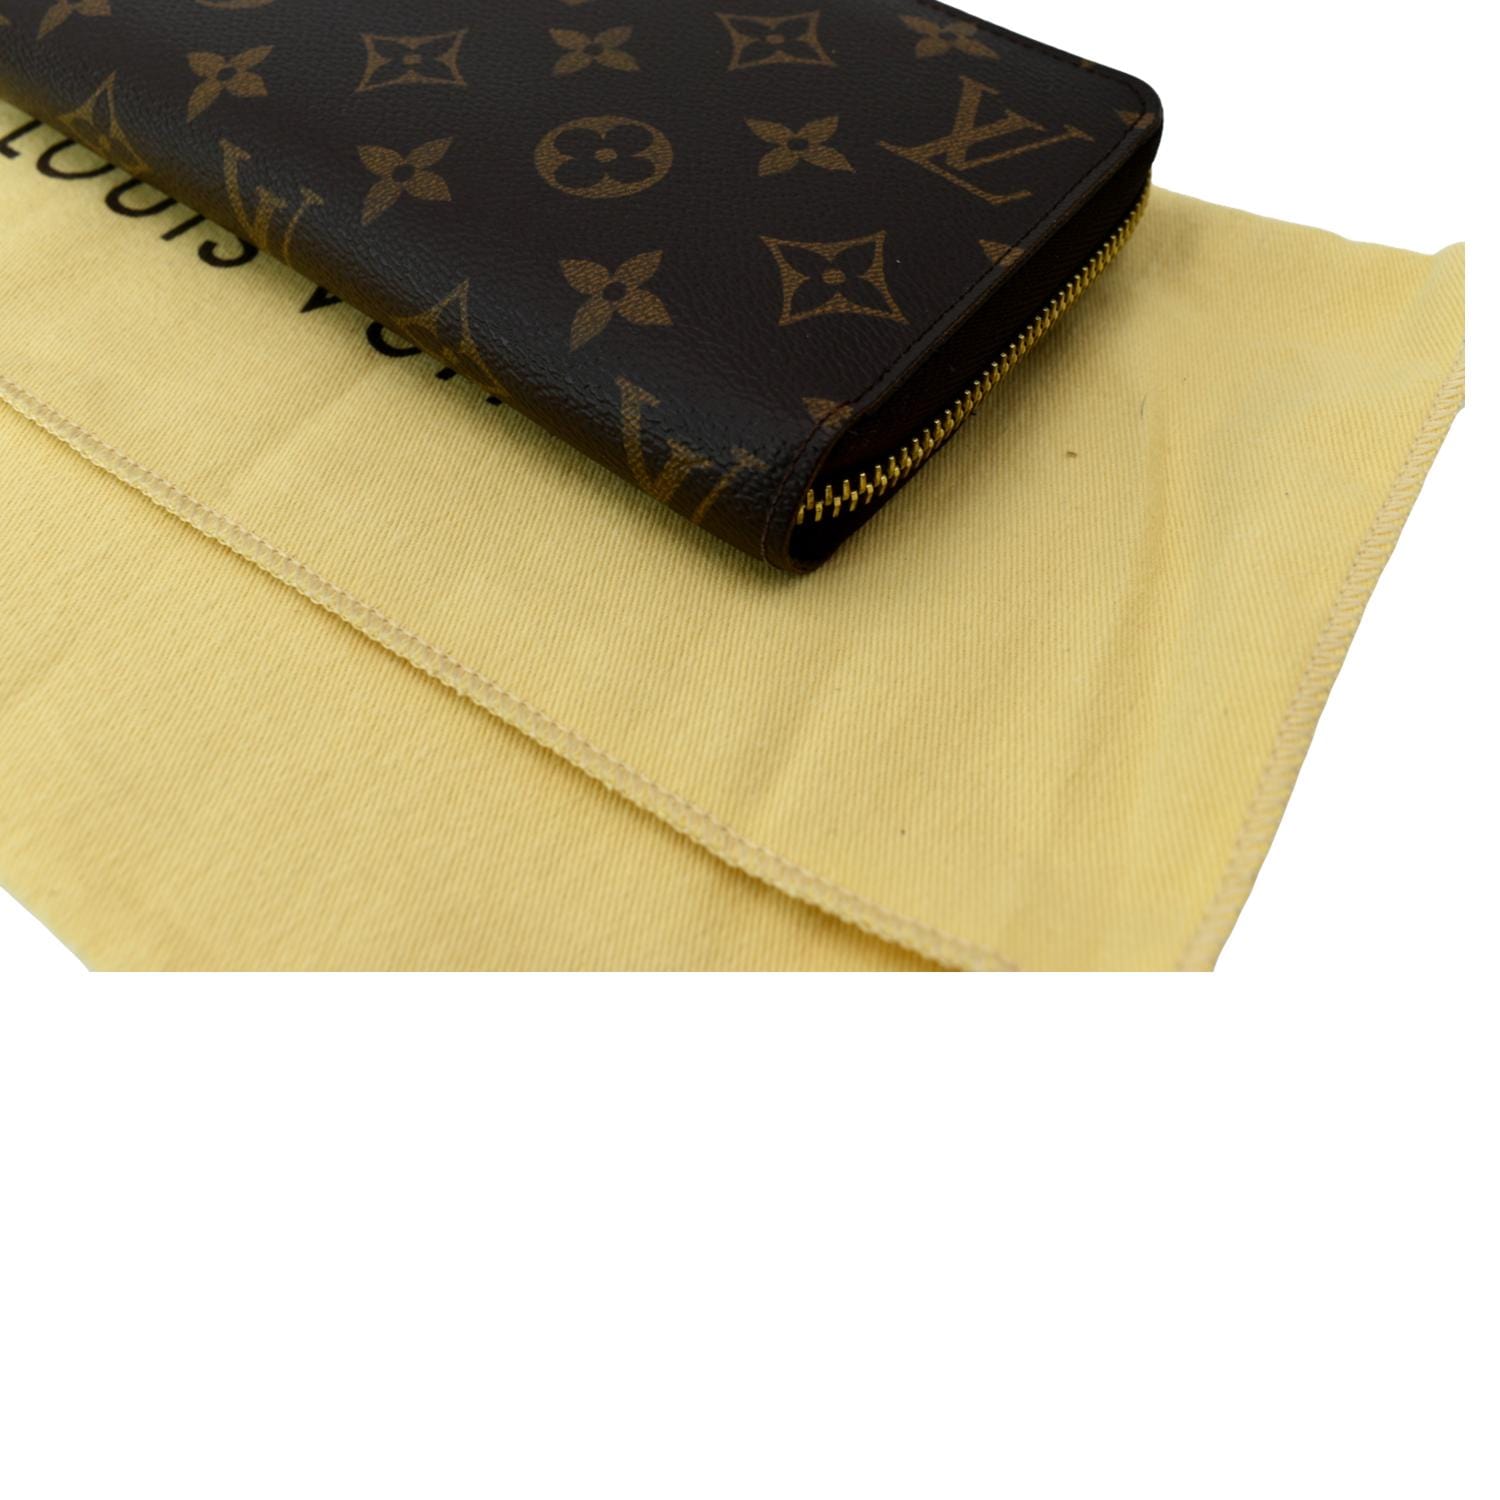 Zippy leather wallet Louis Vuitton Brown in Leather - 33956398